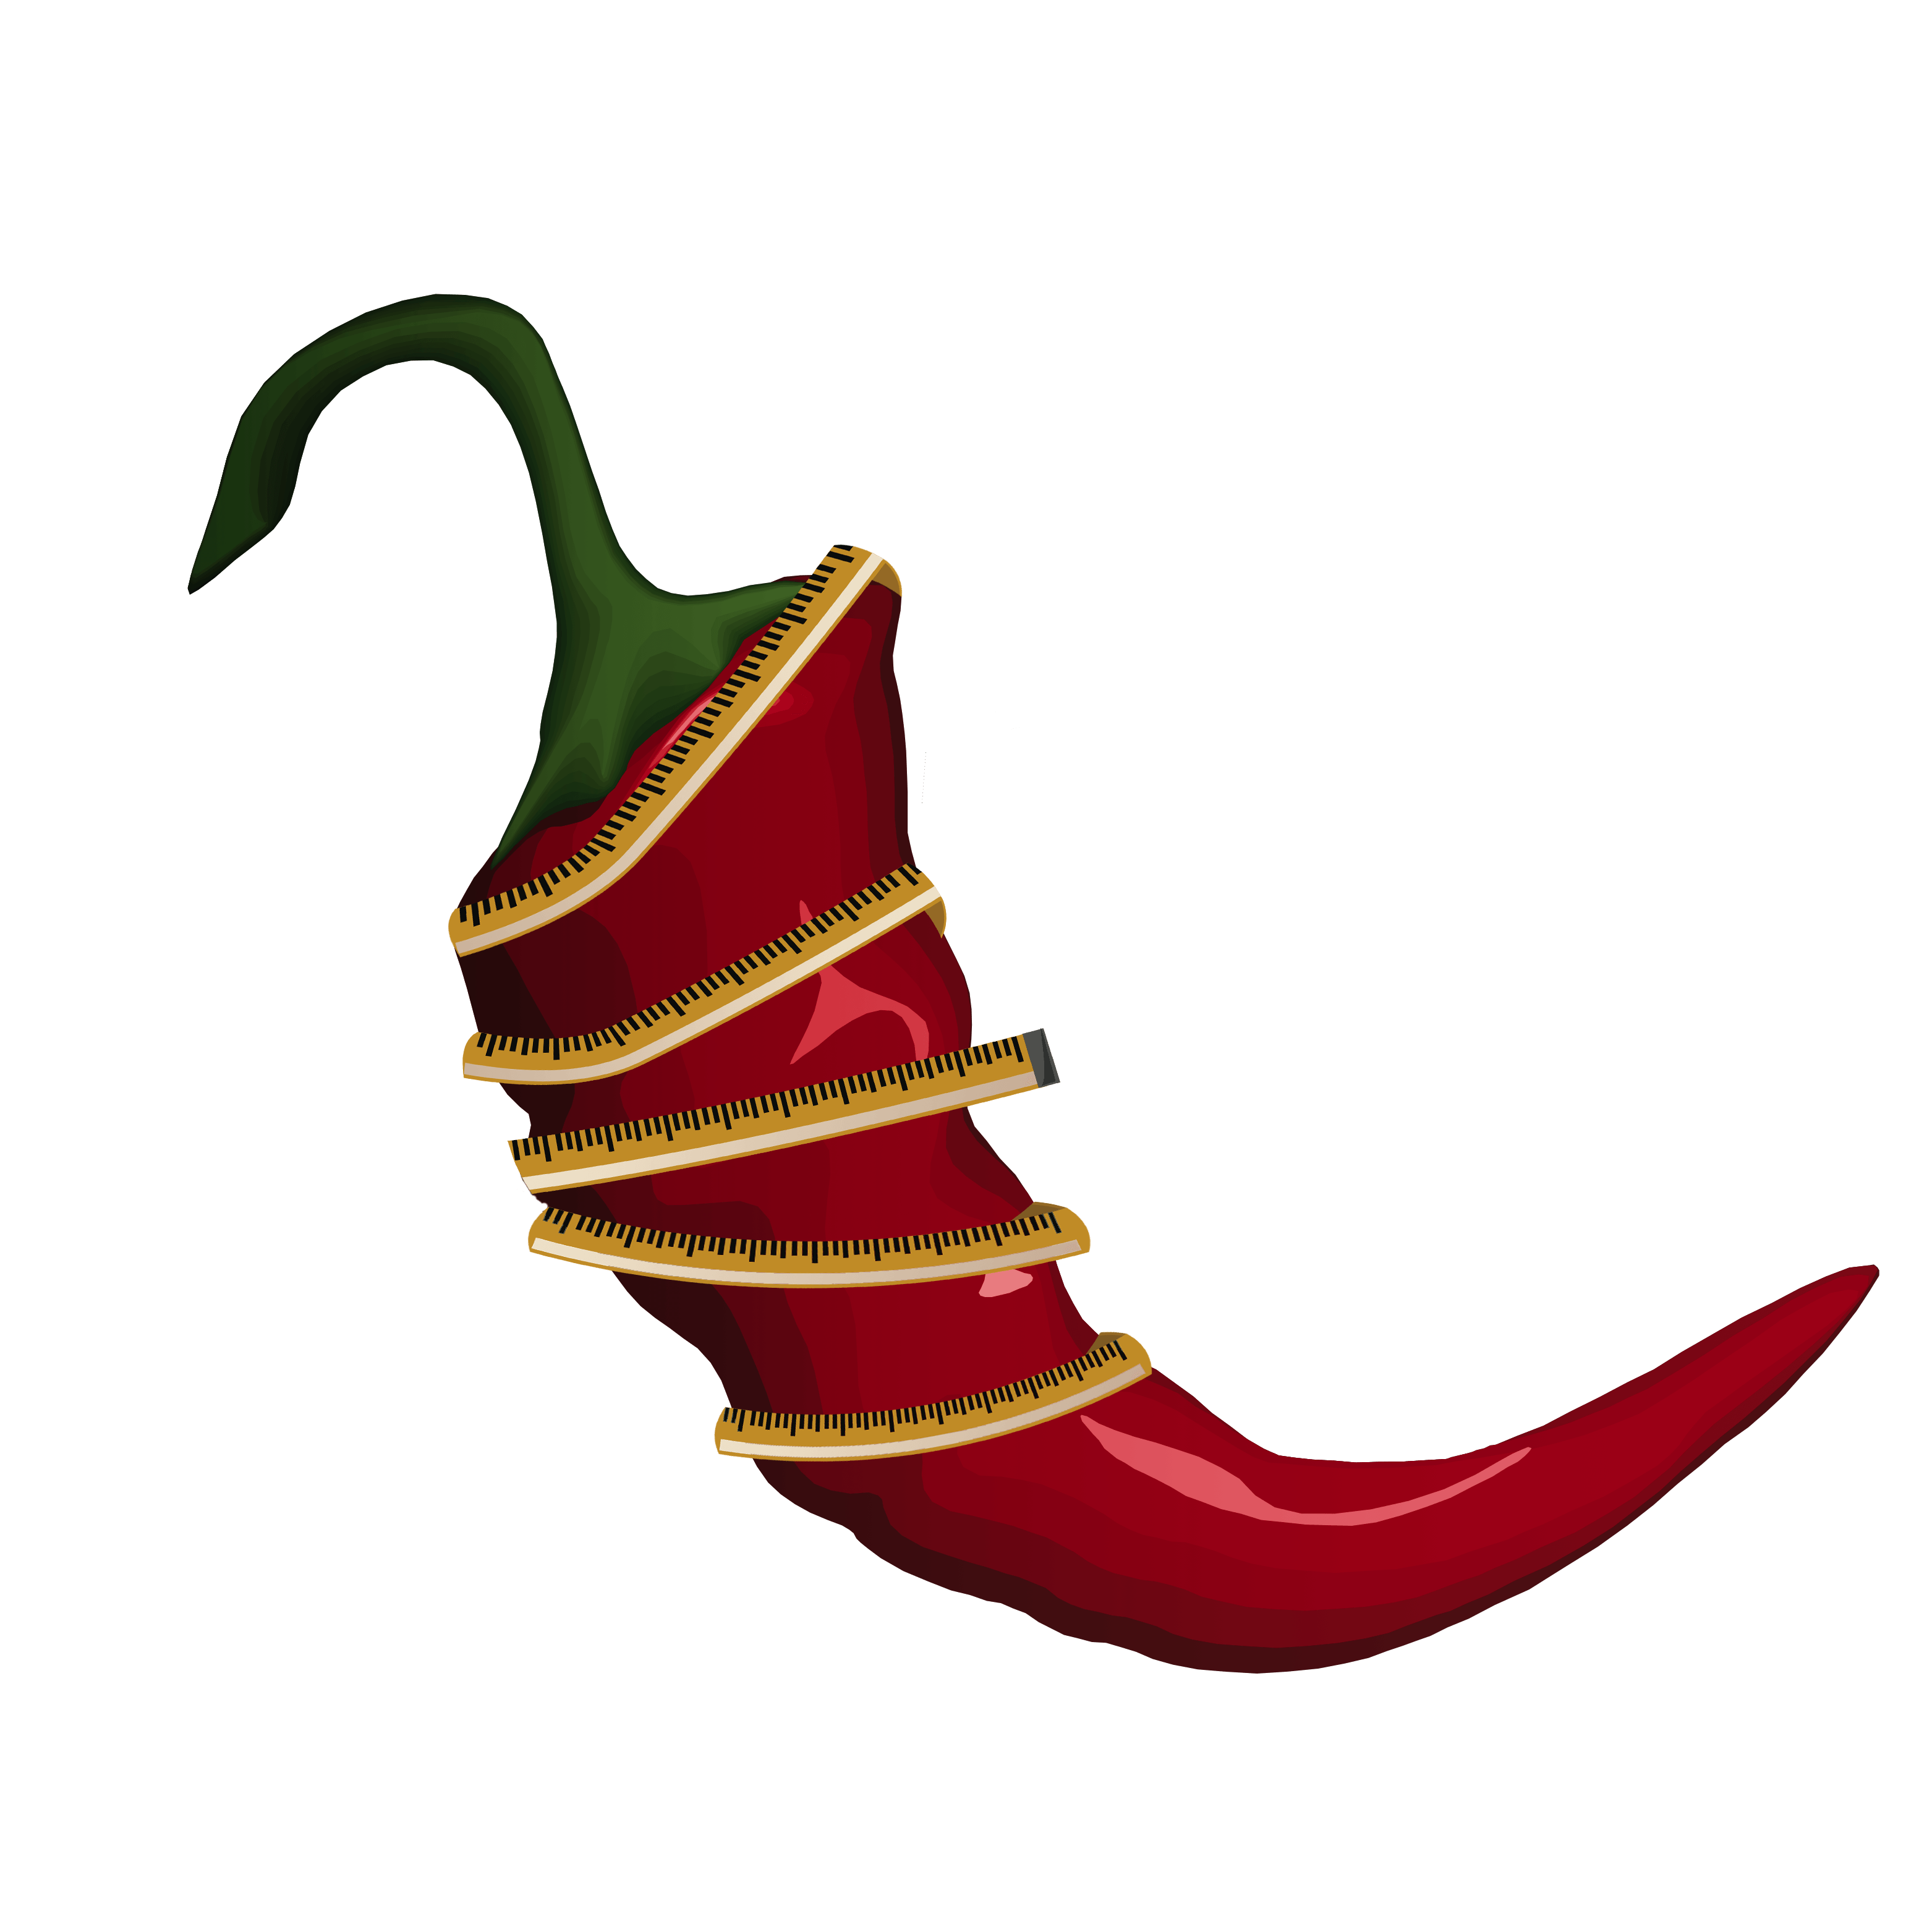 Peppers clipart ghost pepper, Peppers ghost pepper Transparent FREE for